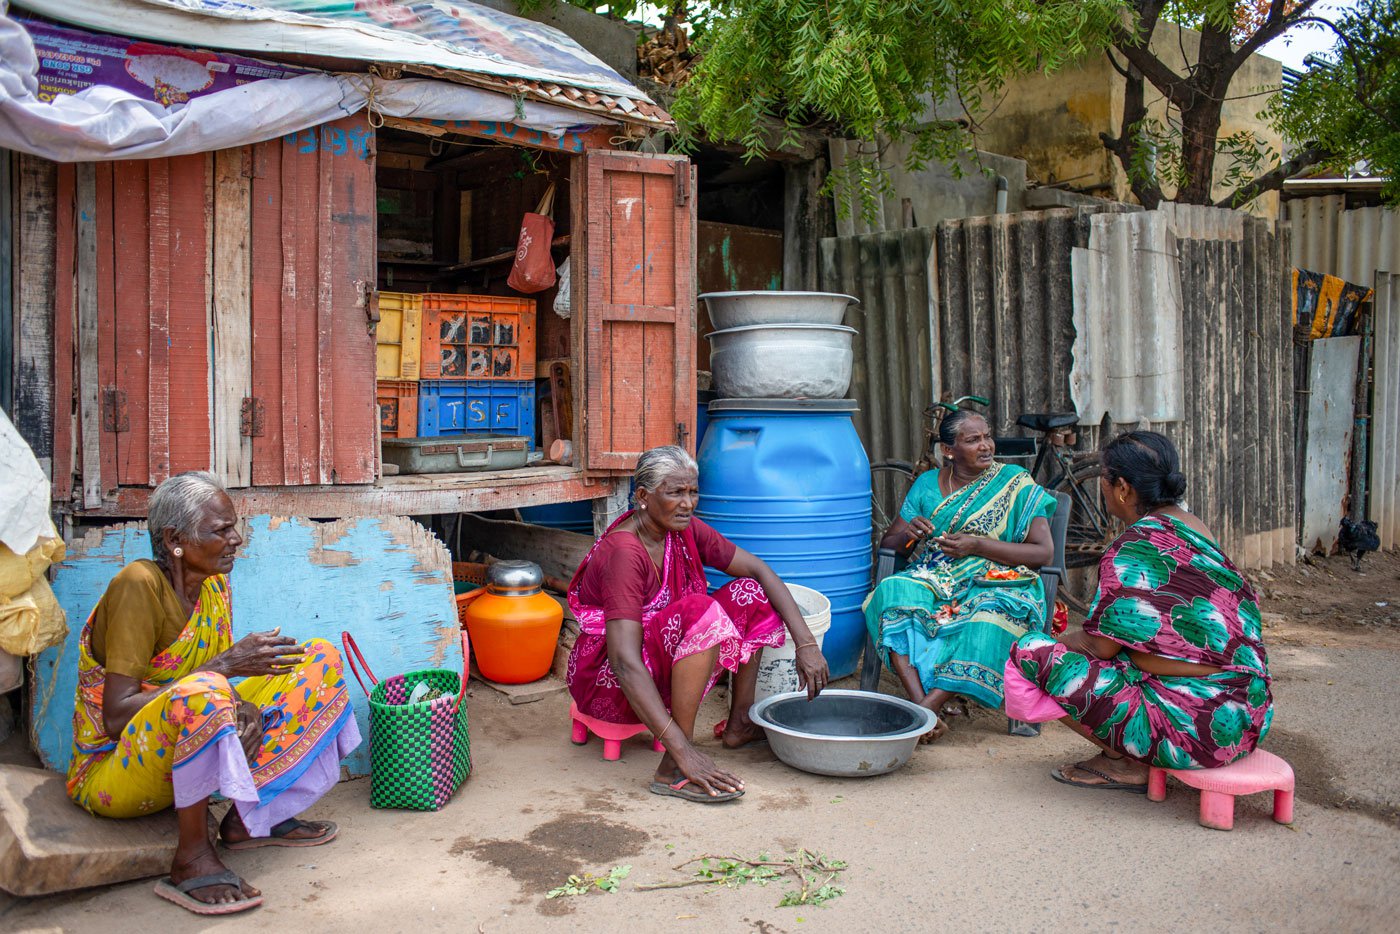 Fathima and her sisters outside their shop